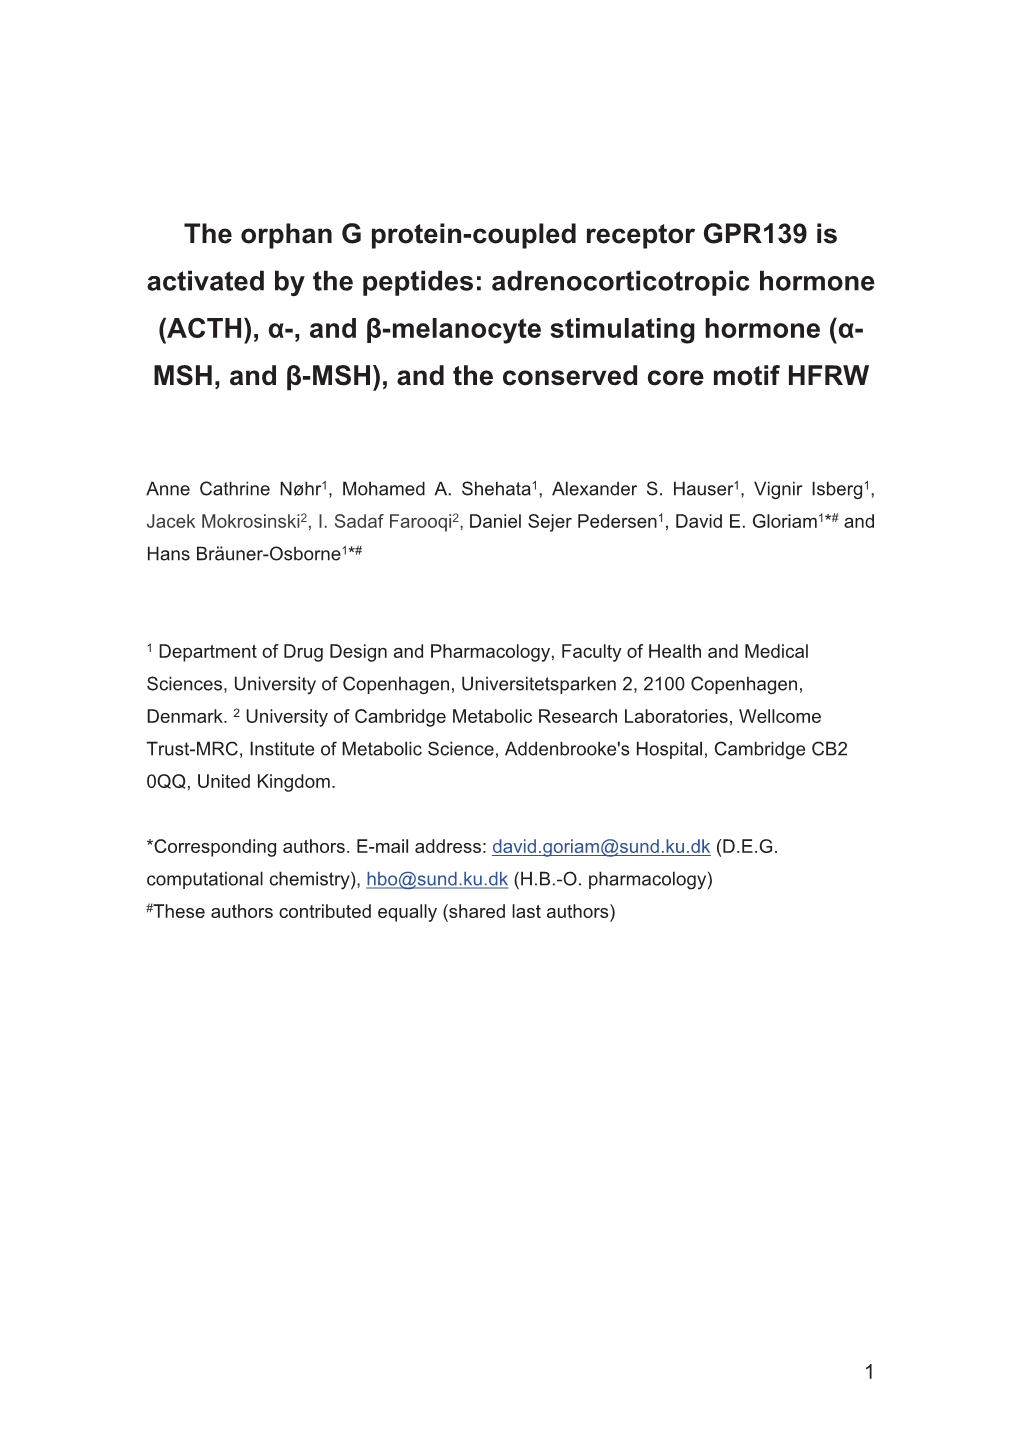 The Orphan G Protein-Coupled Receptor GPR139 Is Activated by The